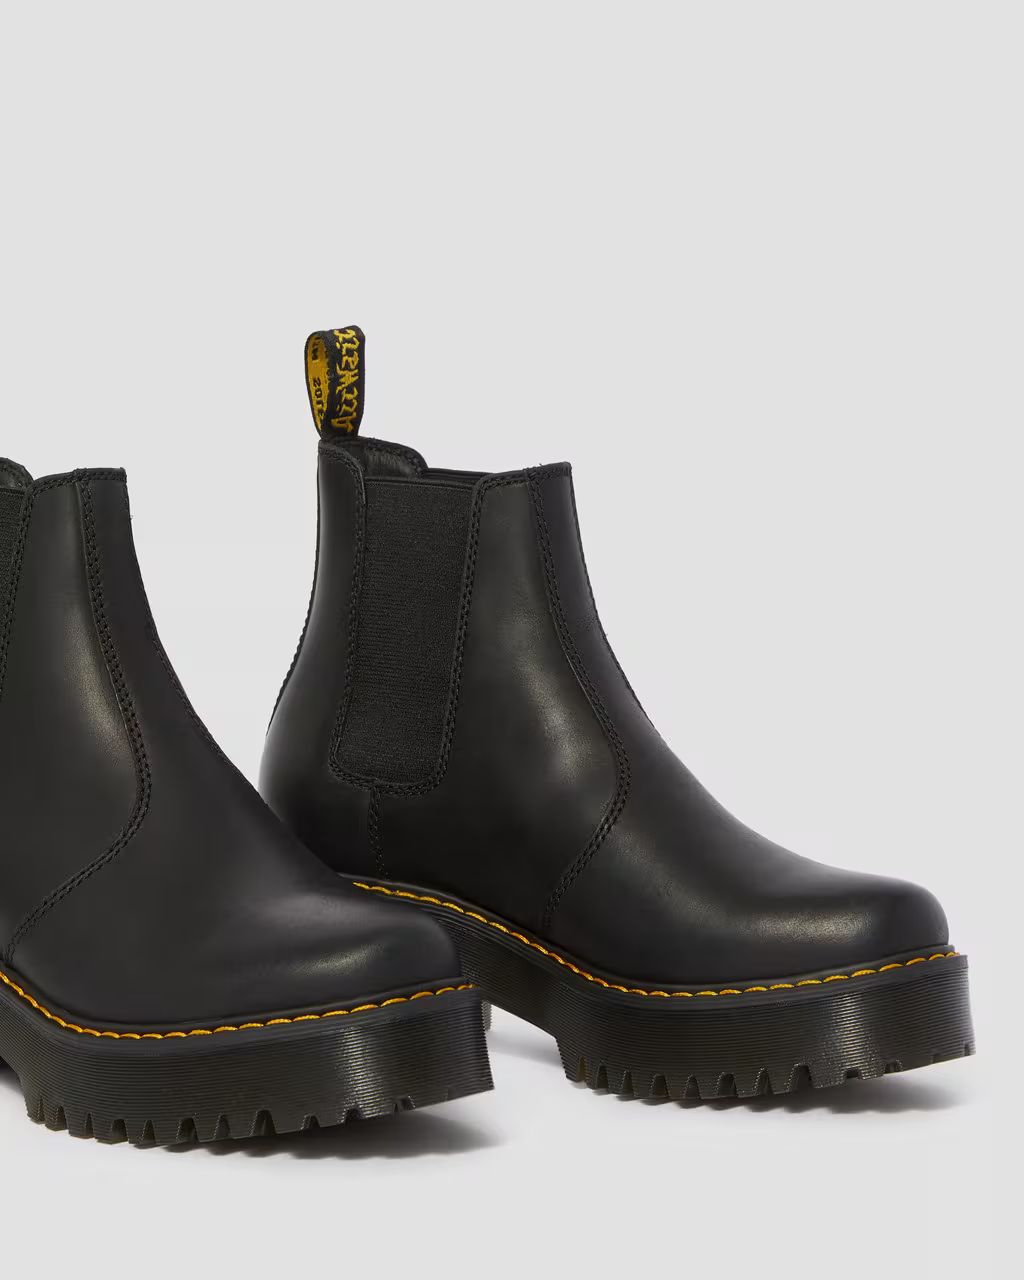 Rometty Wyoming Leather Platform Chelsea Boots | Dr. Martens